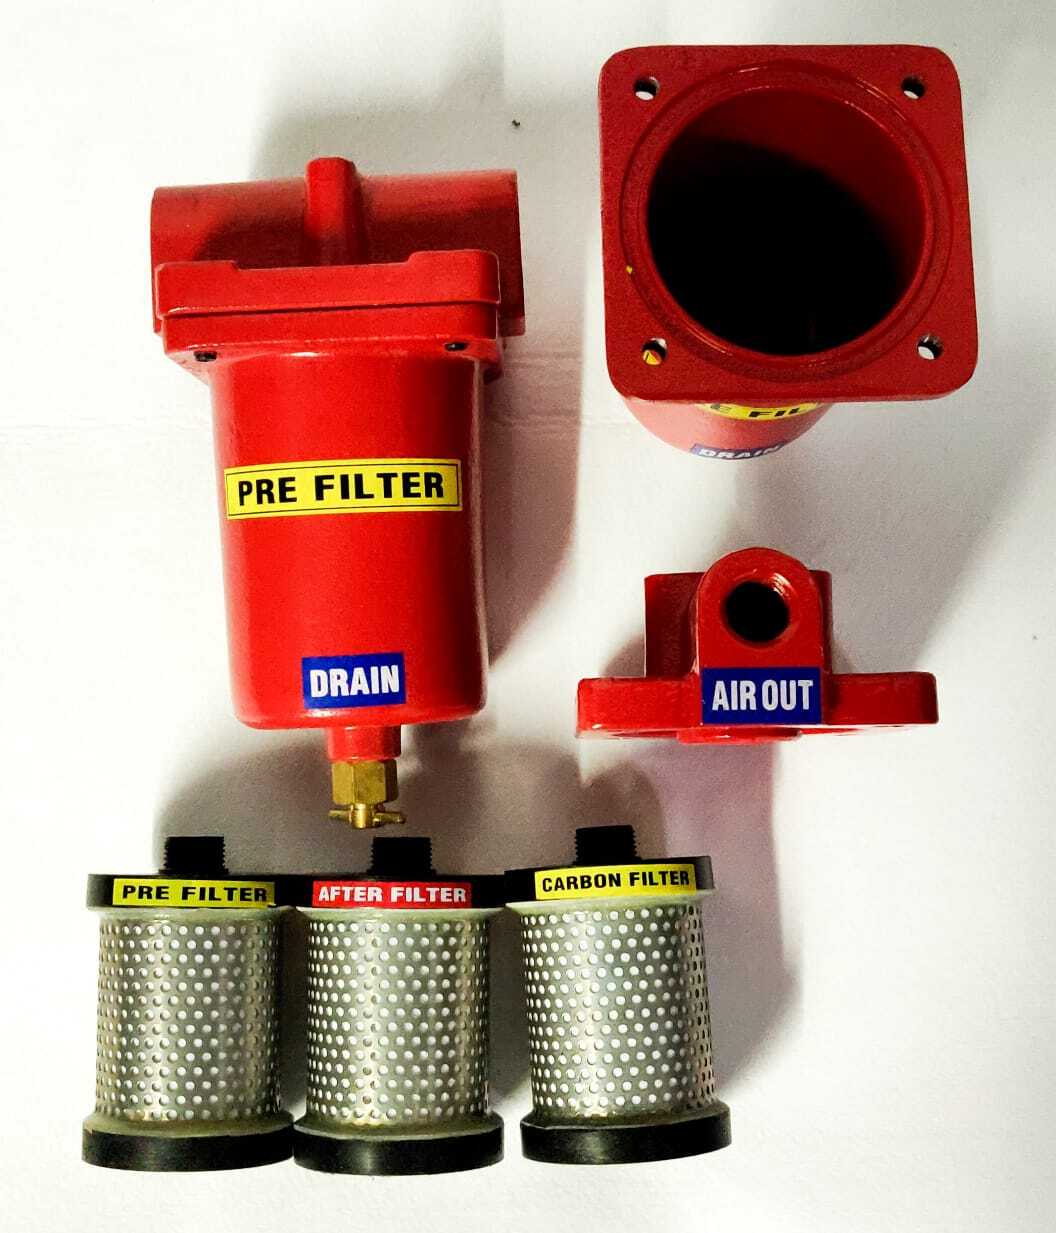 activated Pre filter